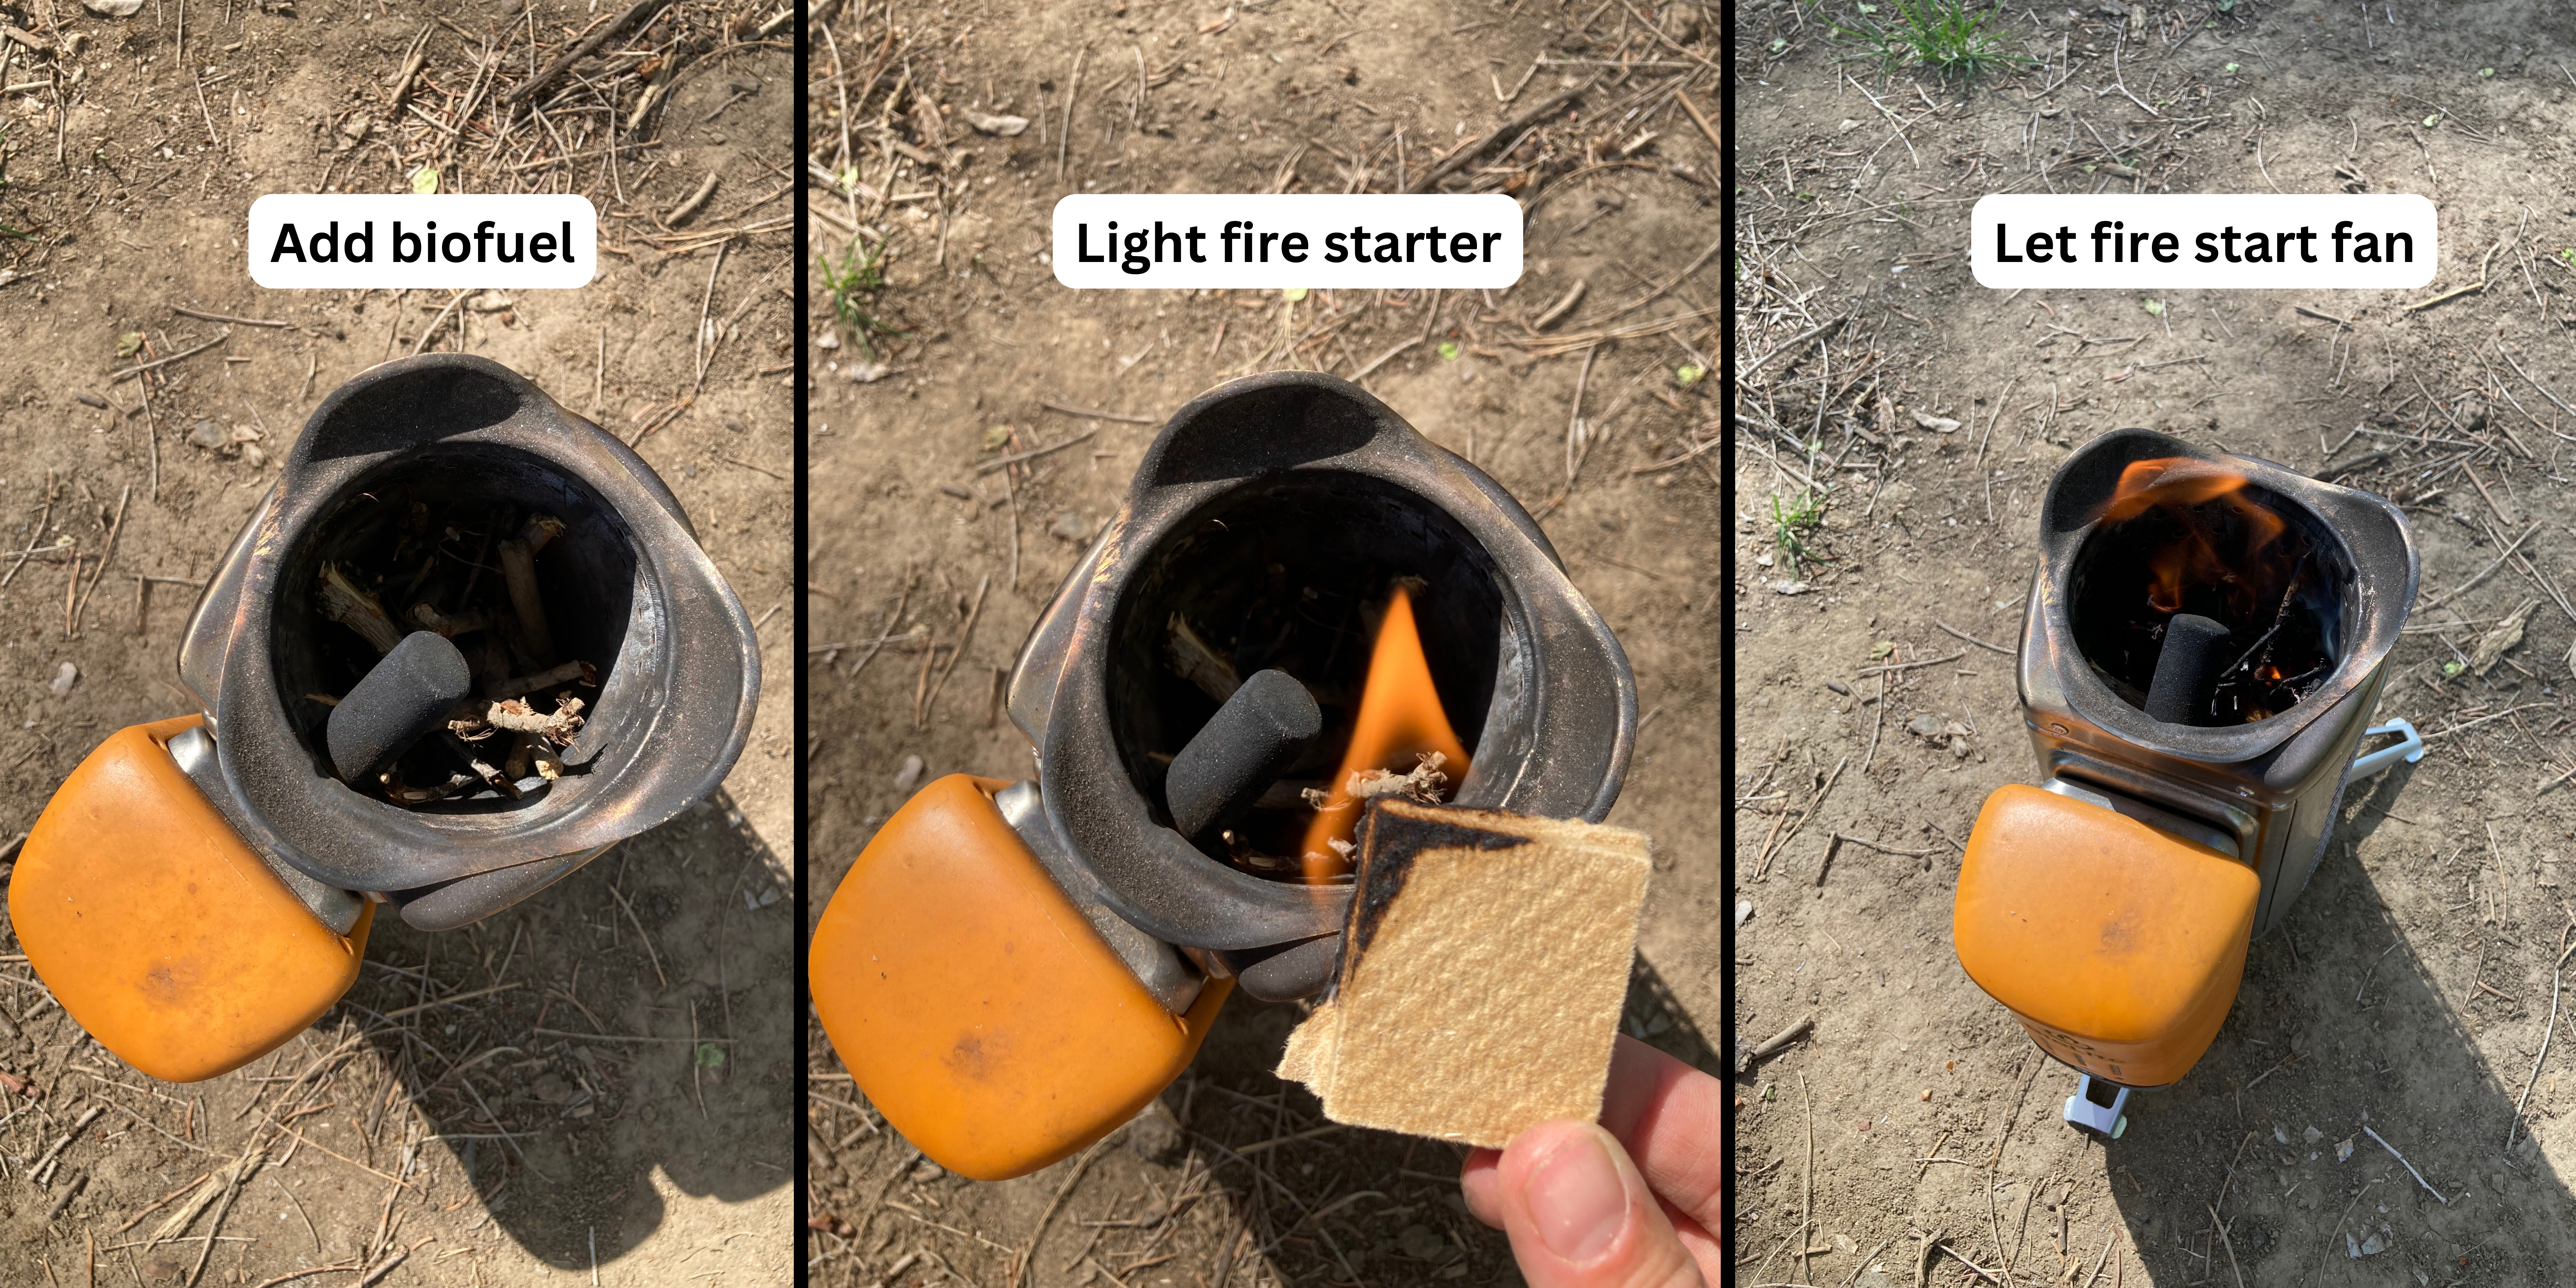 BioLite Camp Stove 2+: Tested and Reviewed